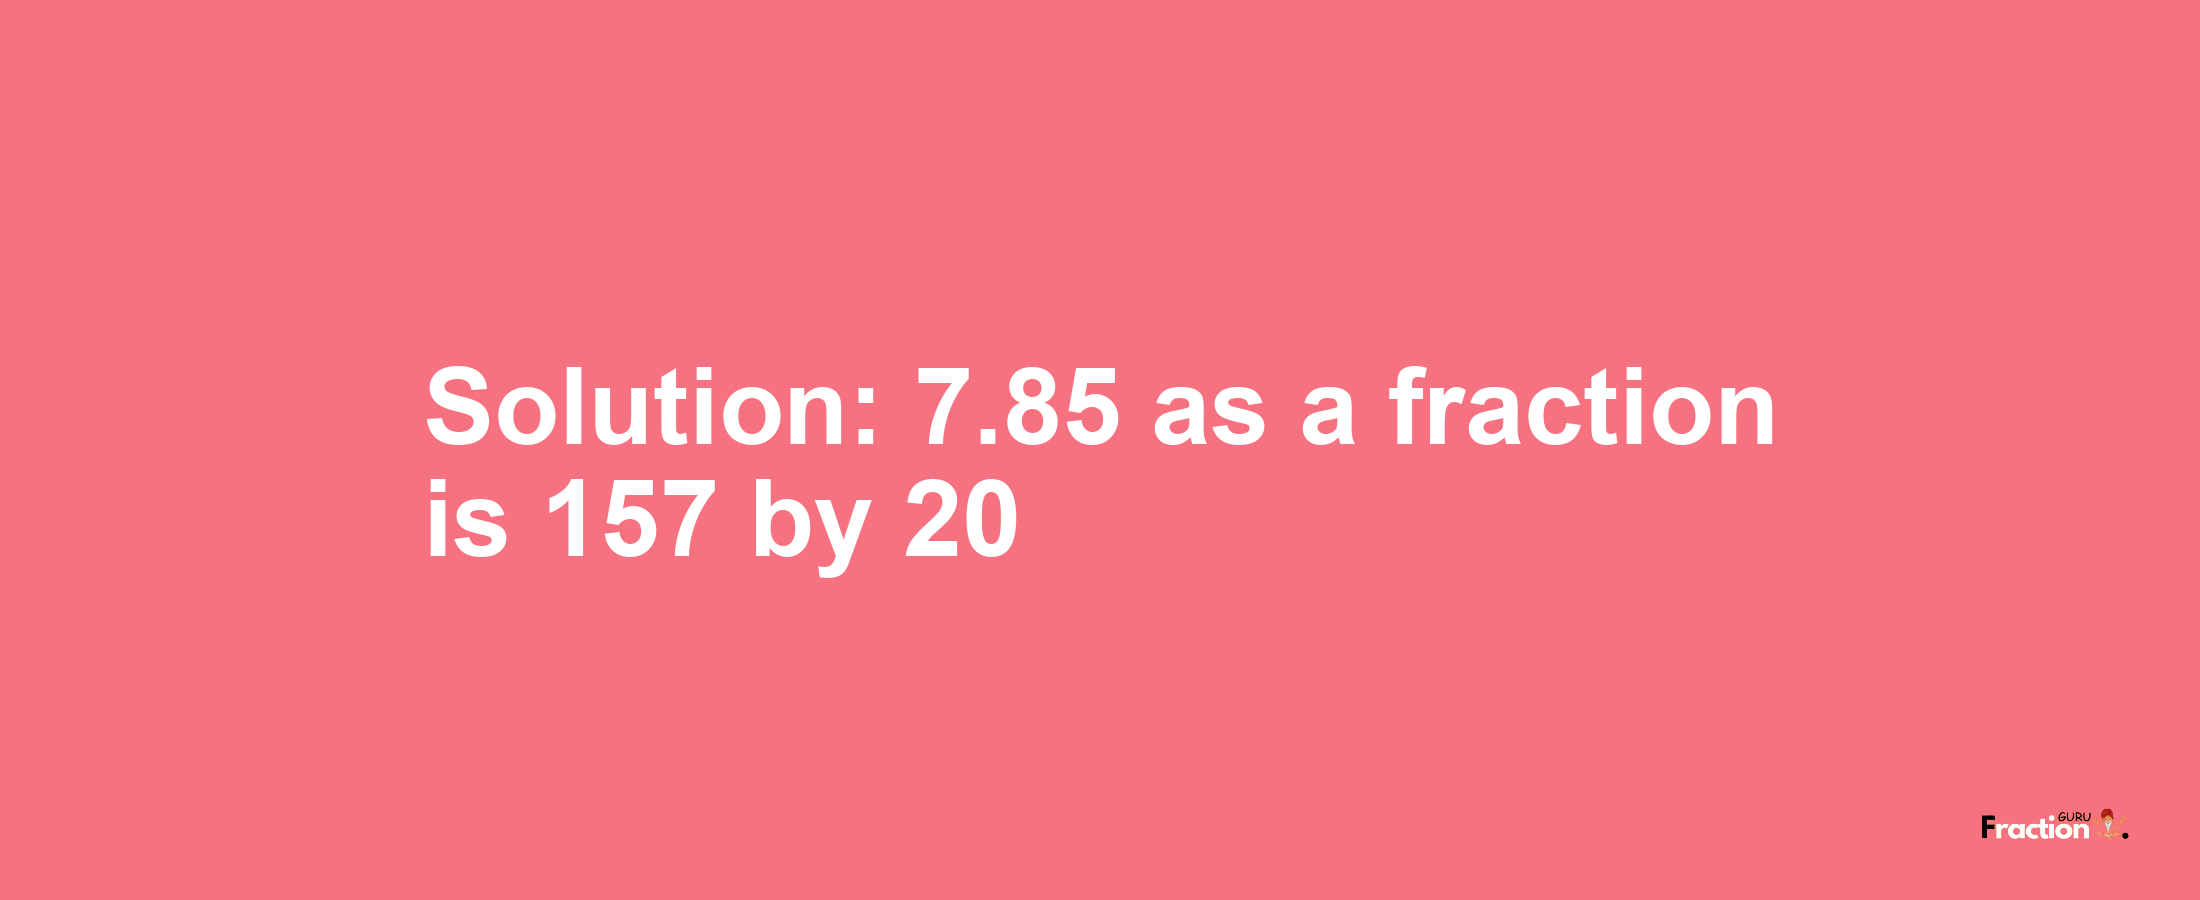 Solution:7.85 as a fraction is 157/20